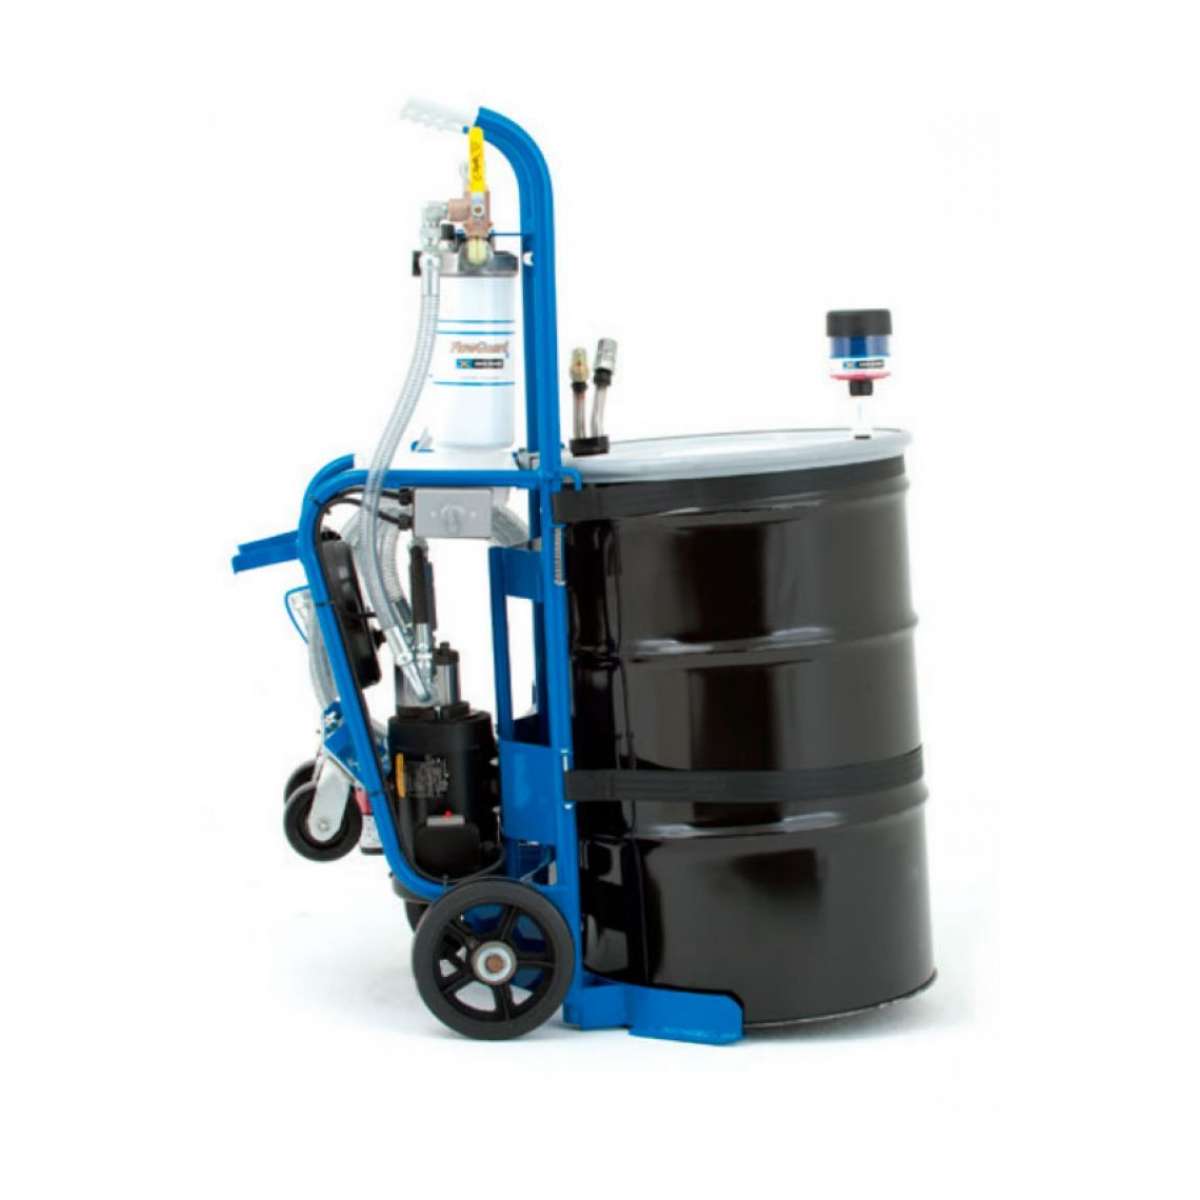 8 GPM Dual Stage Drum Handling/Filtration Cart